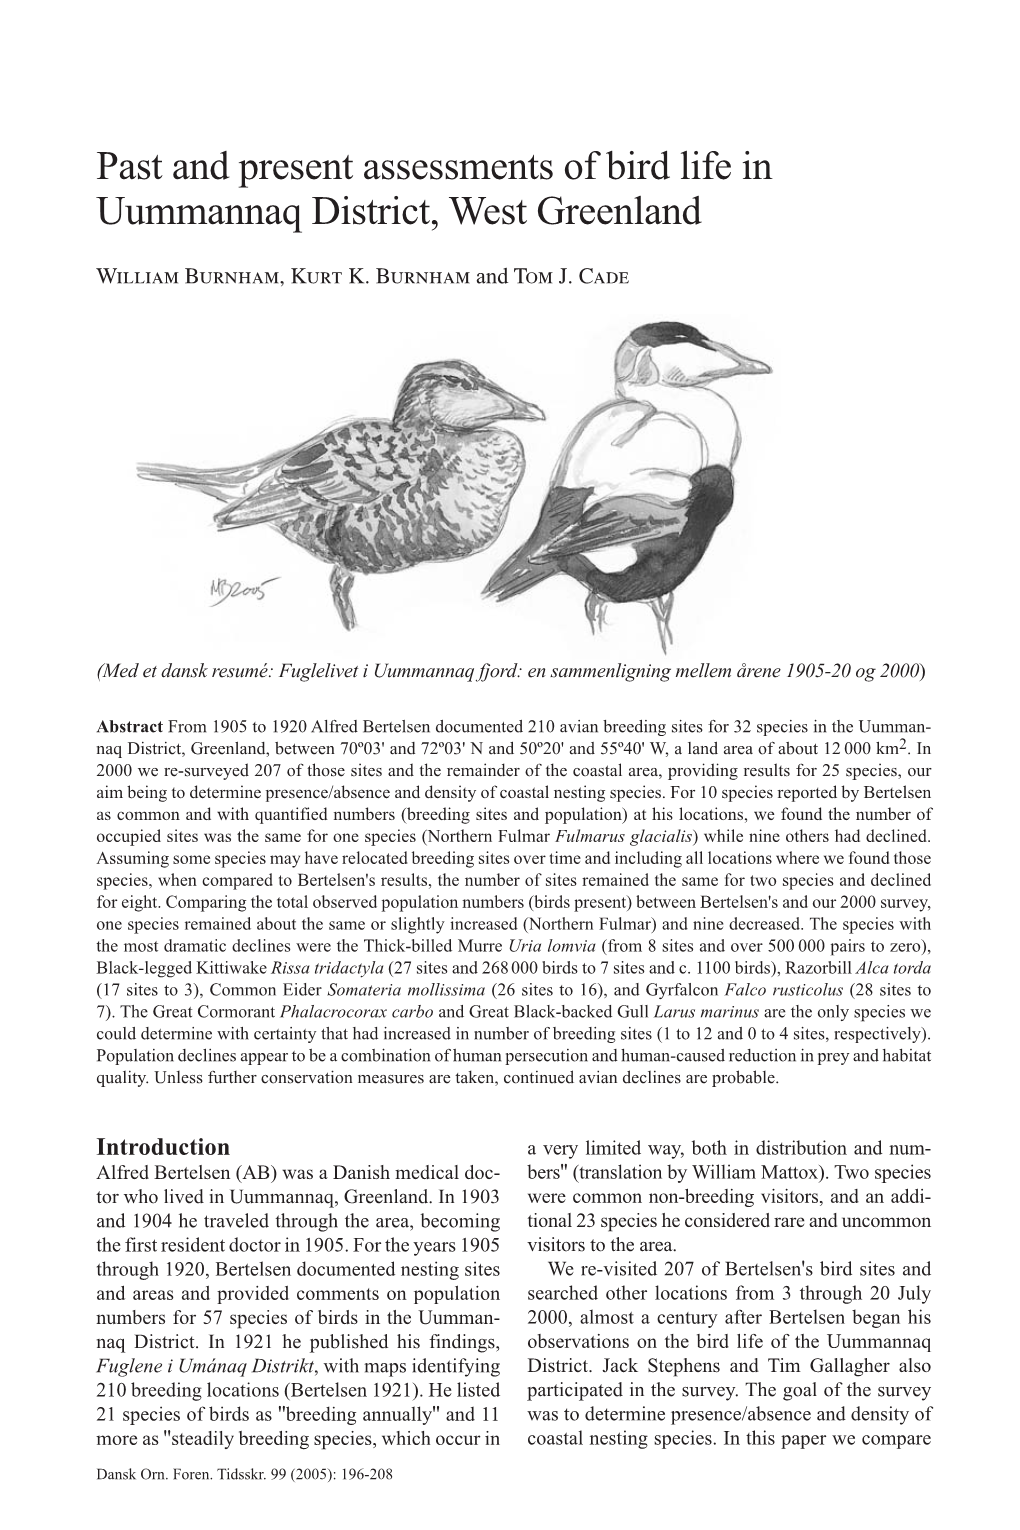 Past and Present Assessments of Bird Life in Uummannaq District, West Greenland